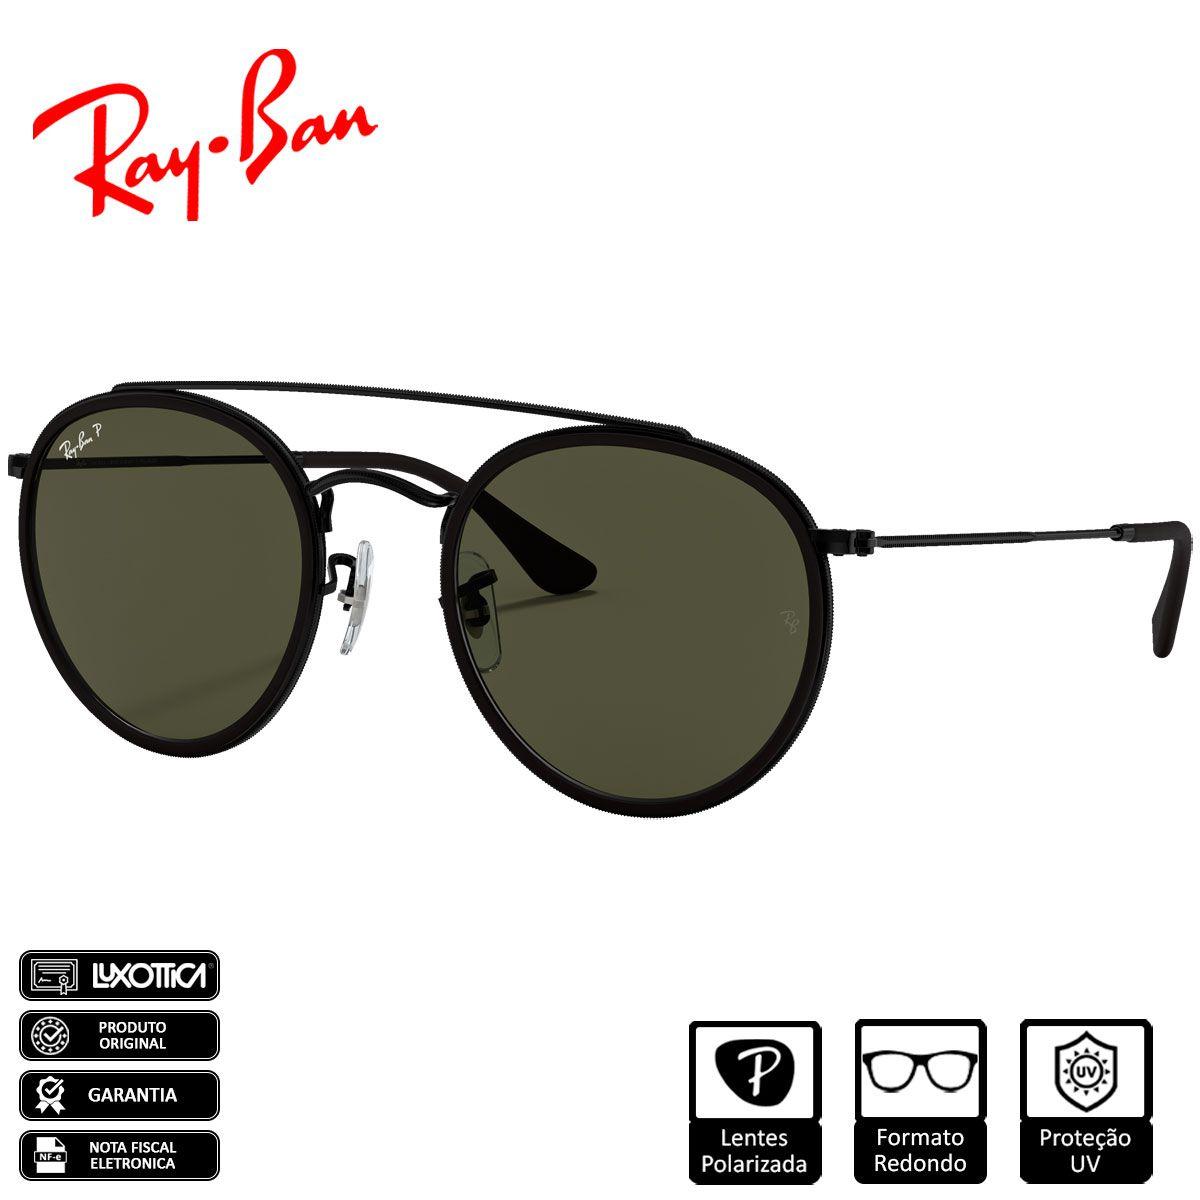 Ray- Ban P RB3647-N 002/58 51022 145 3P 